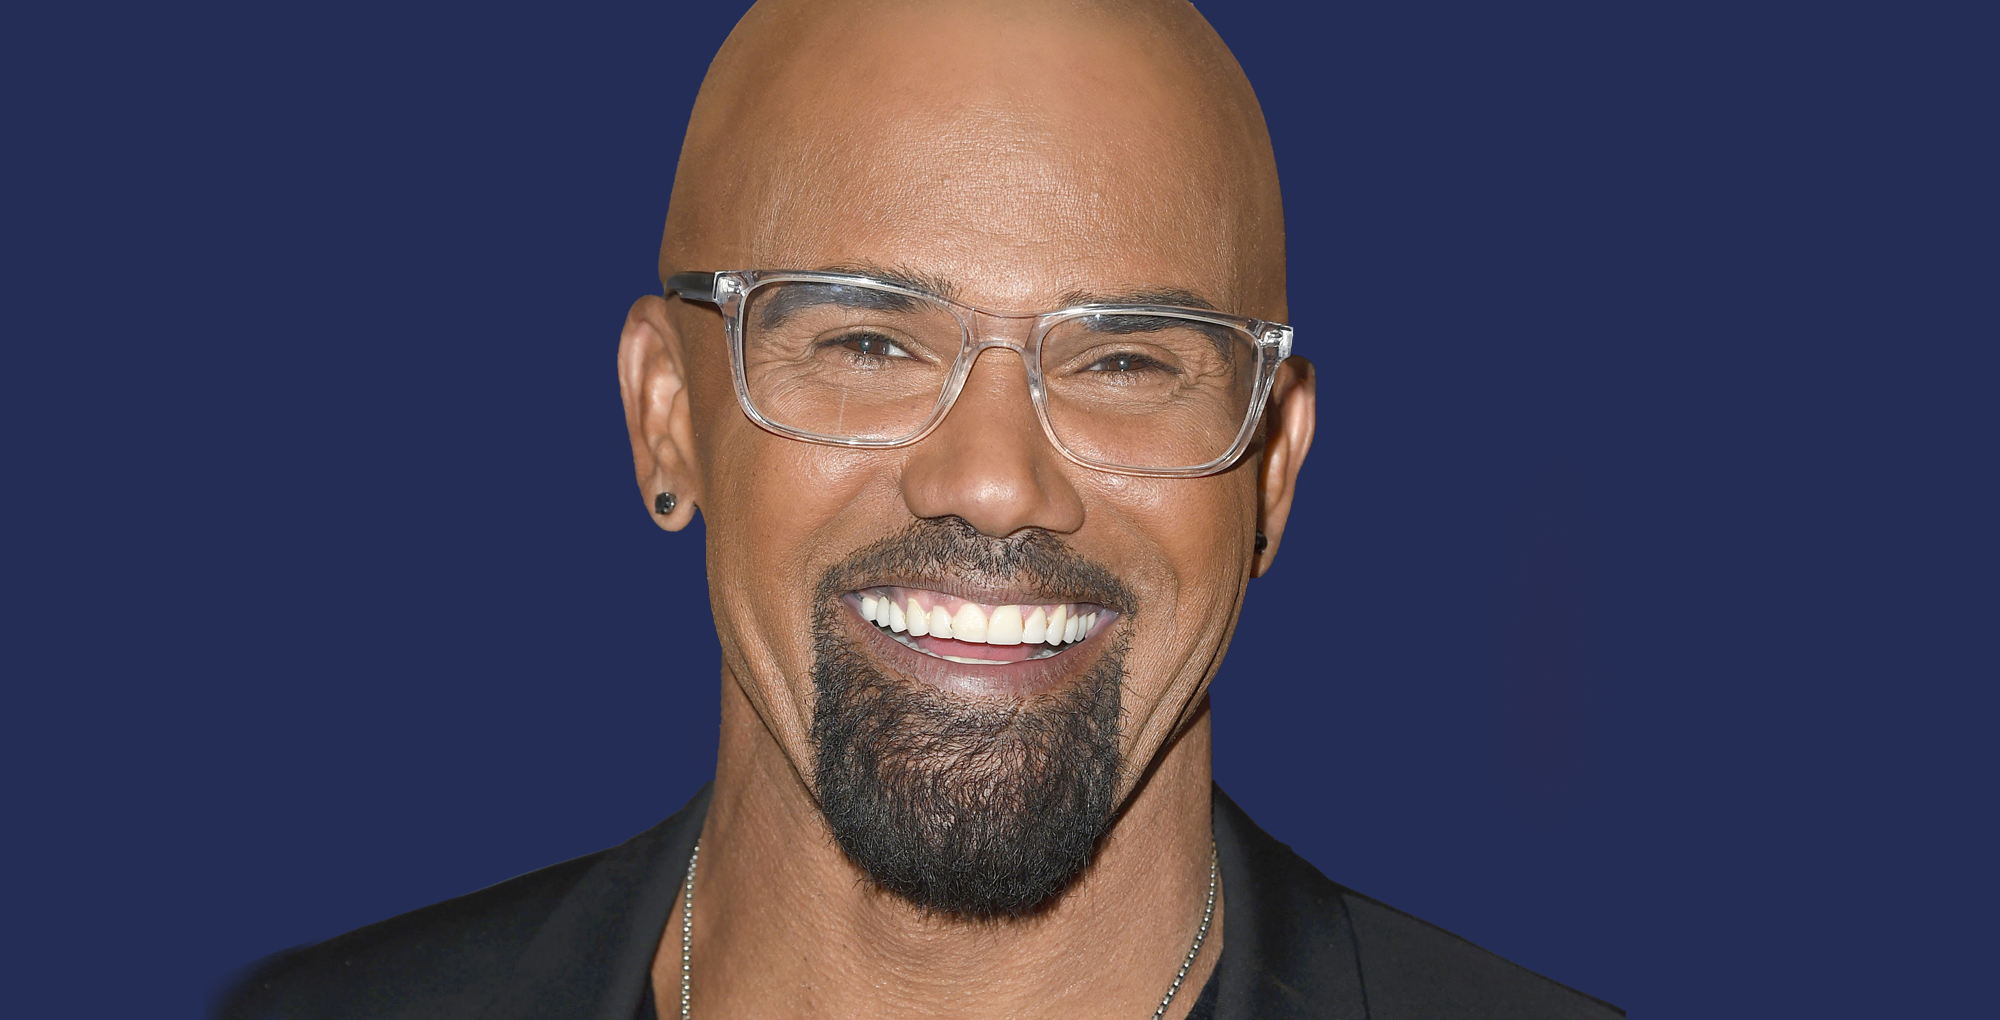 shemar moore alum of young and the restless.